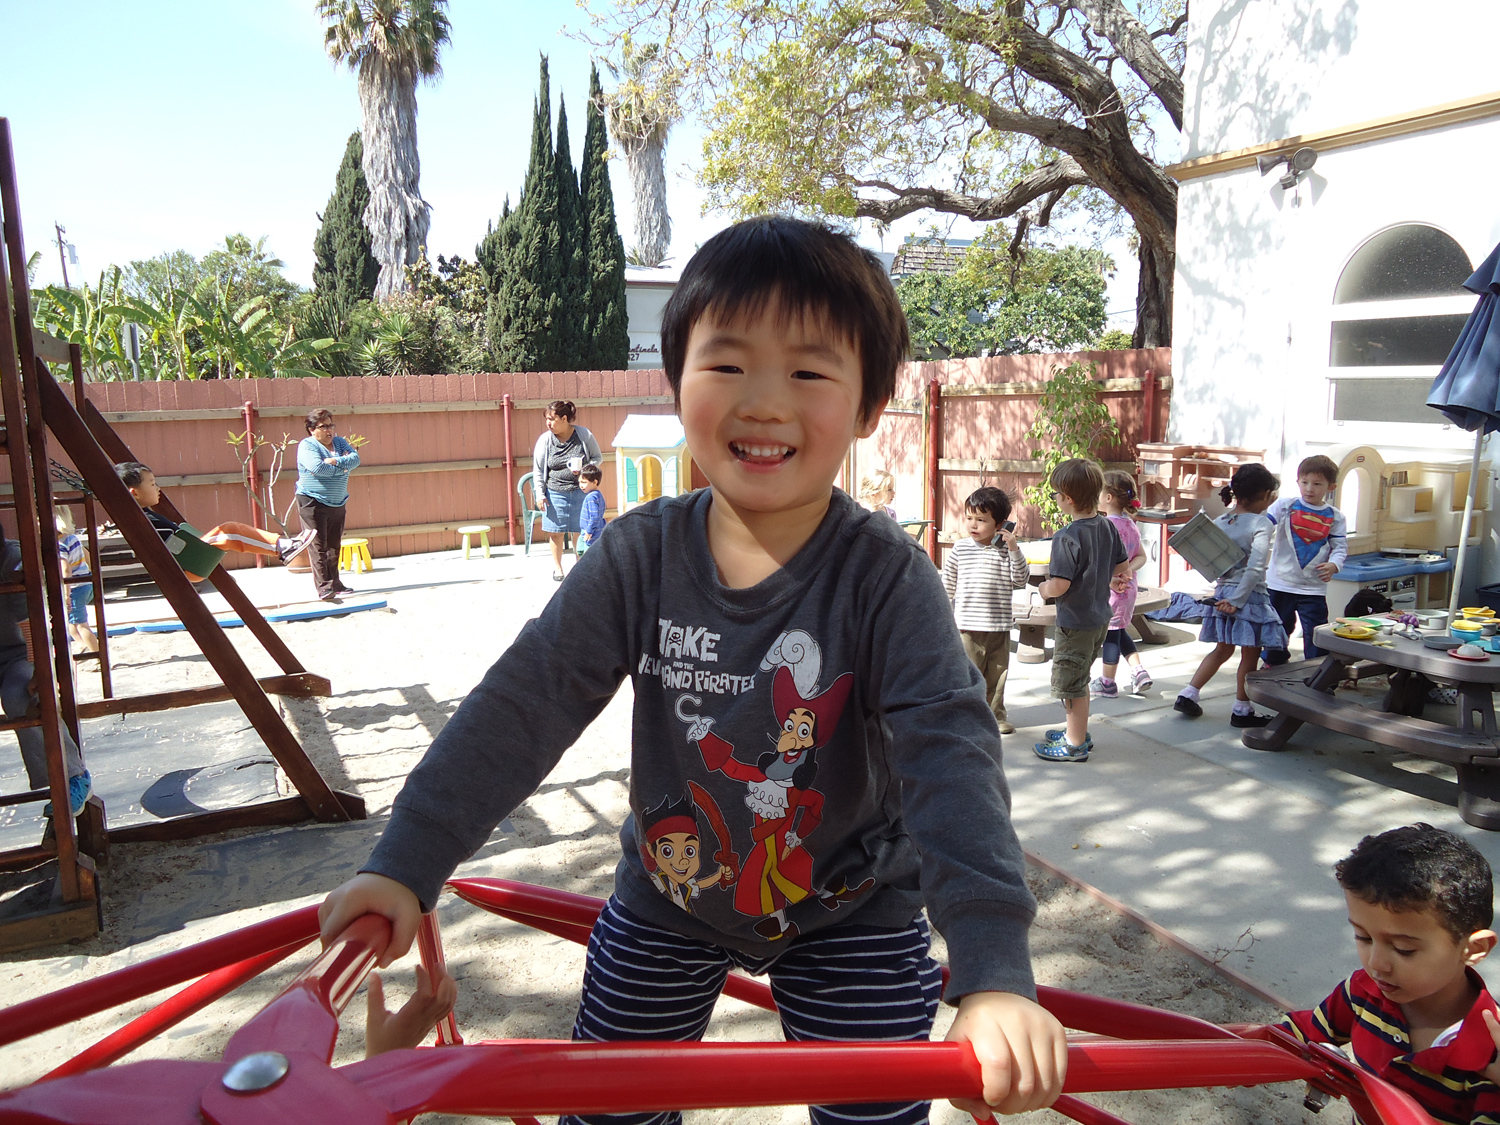 southern california montessori school: Is Not That Difficult As You Think